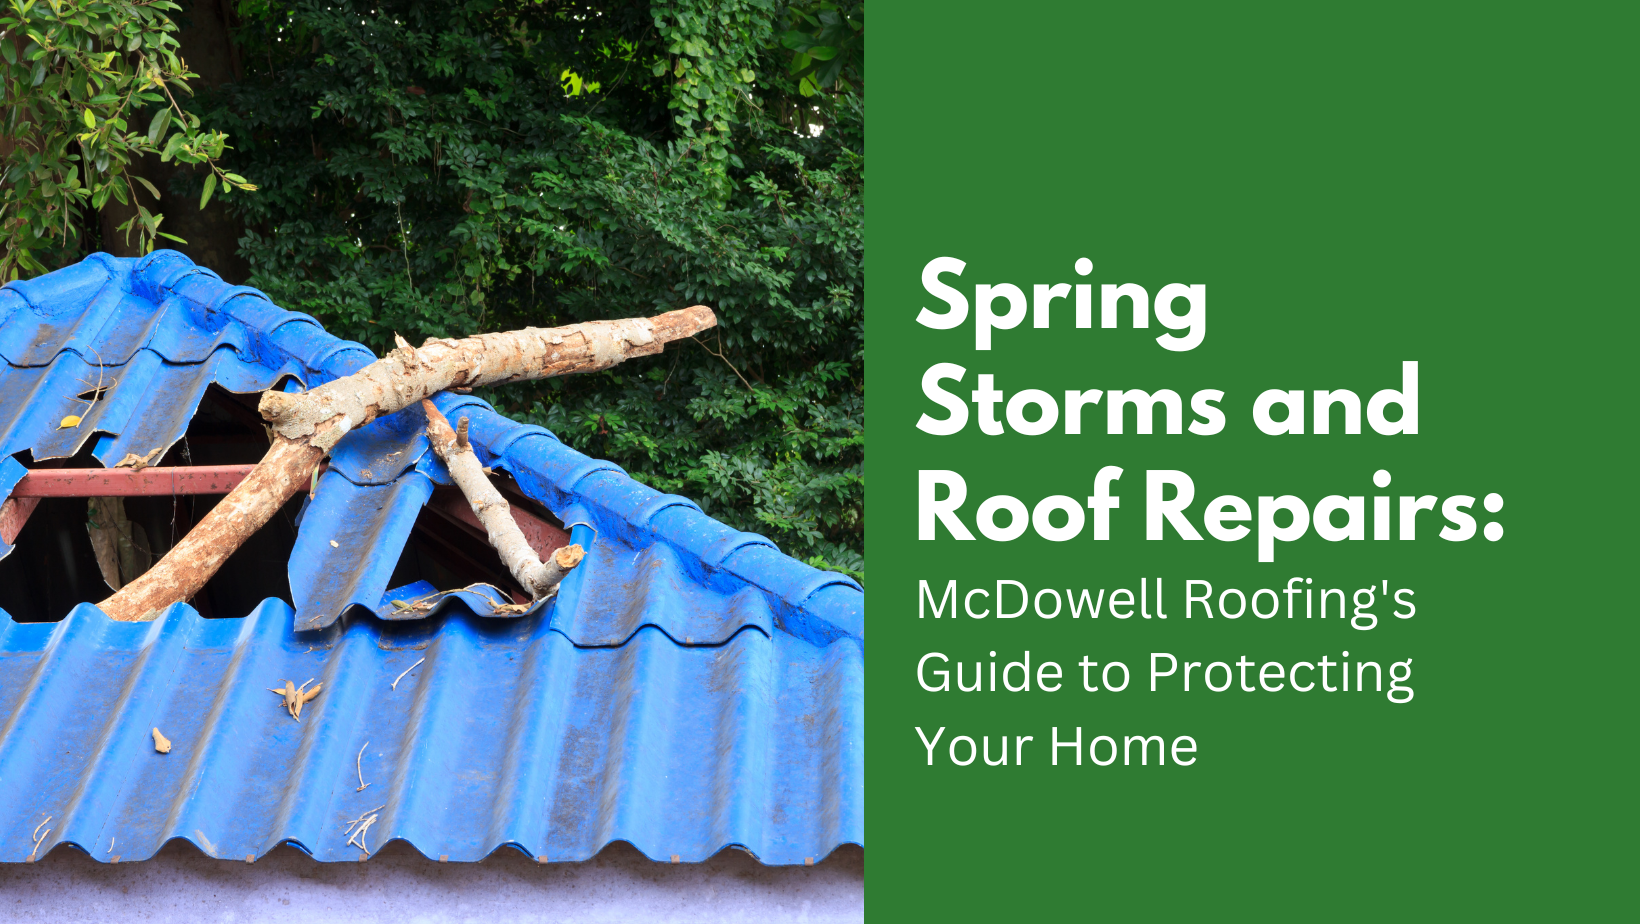 Spring Storms and Roof Repairs: McDowell Roofing's Guide to Protecting Your Home